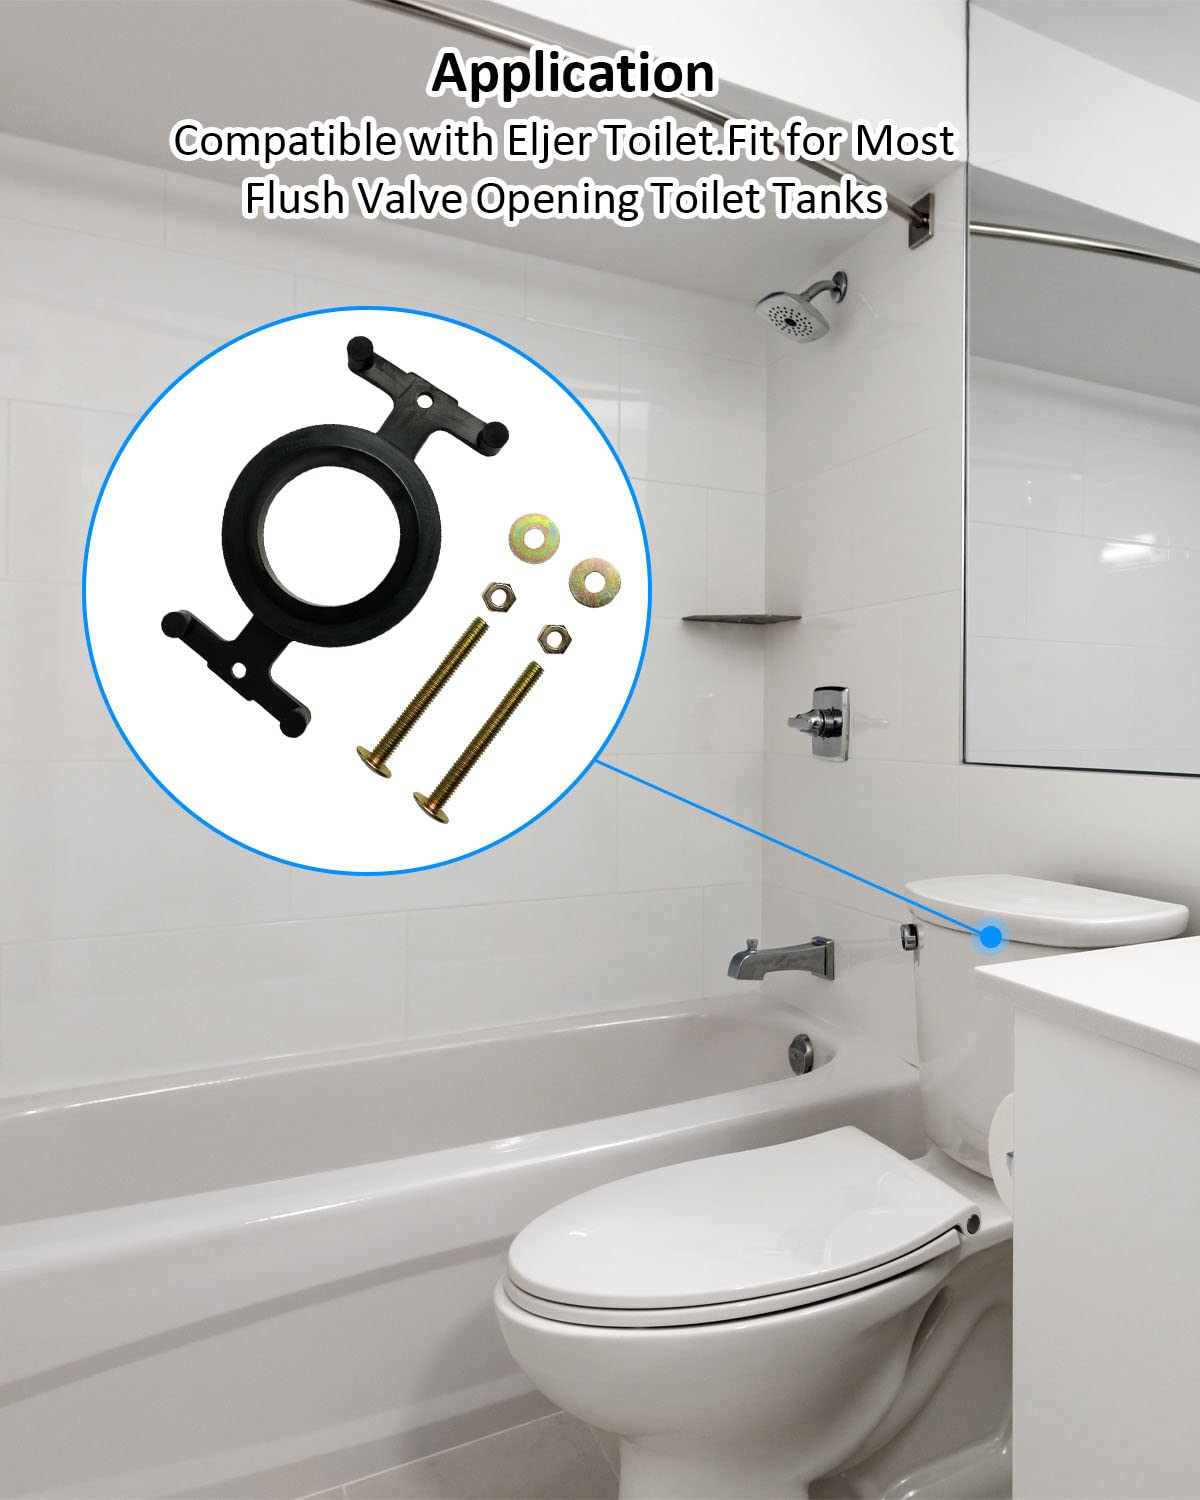 Generic 04-3817 Toilet Tank to Bowl Bolt Set Fit for Eljer Toilet and Most Flush Valve Opening Toilet Tanks with Gasket Solid Brass Kit